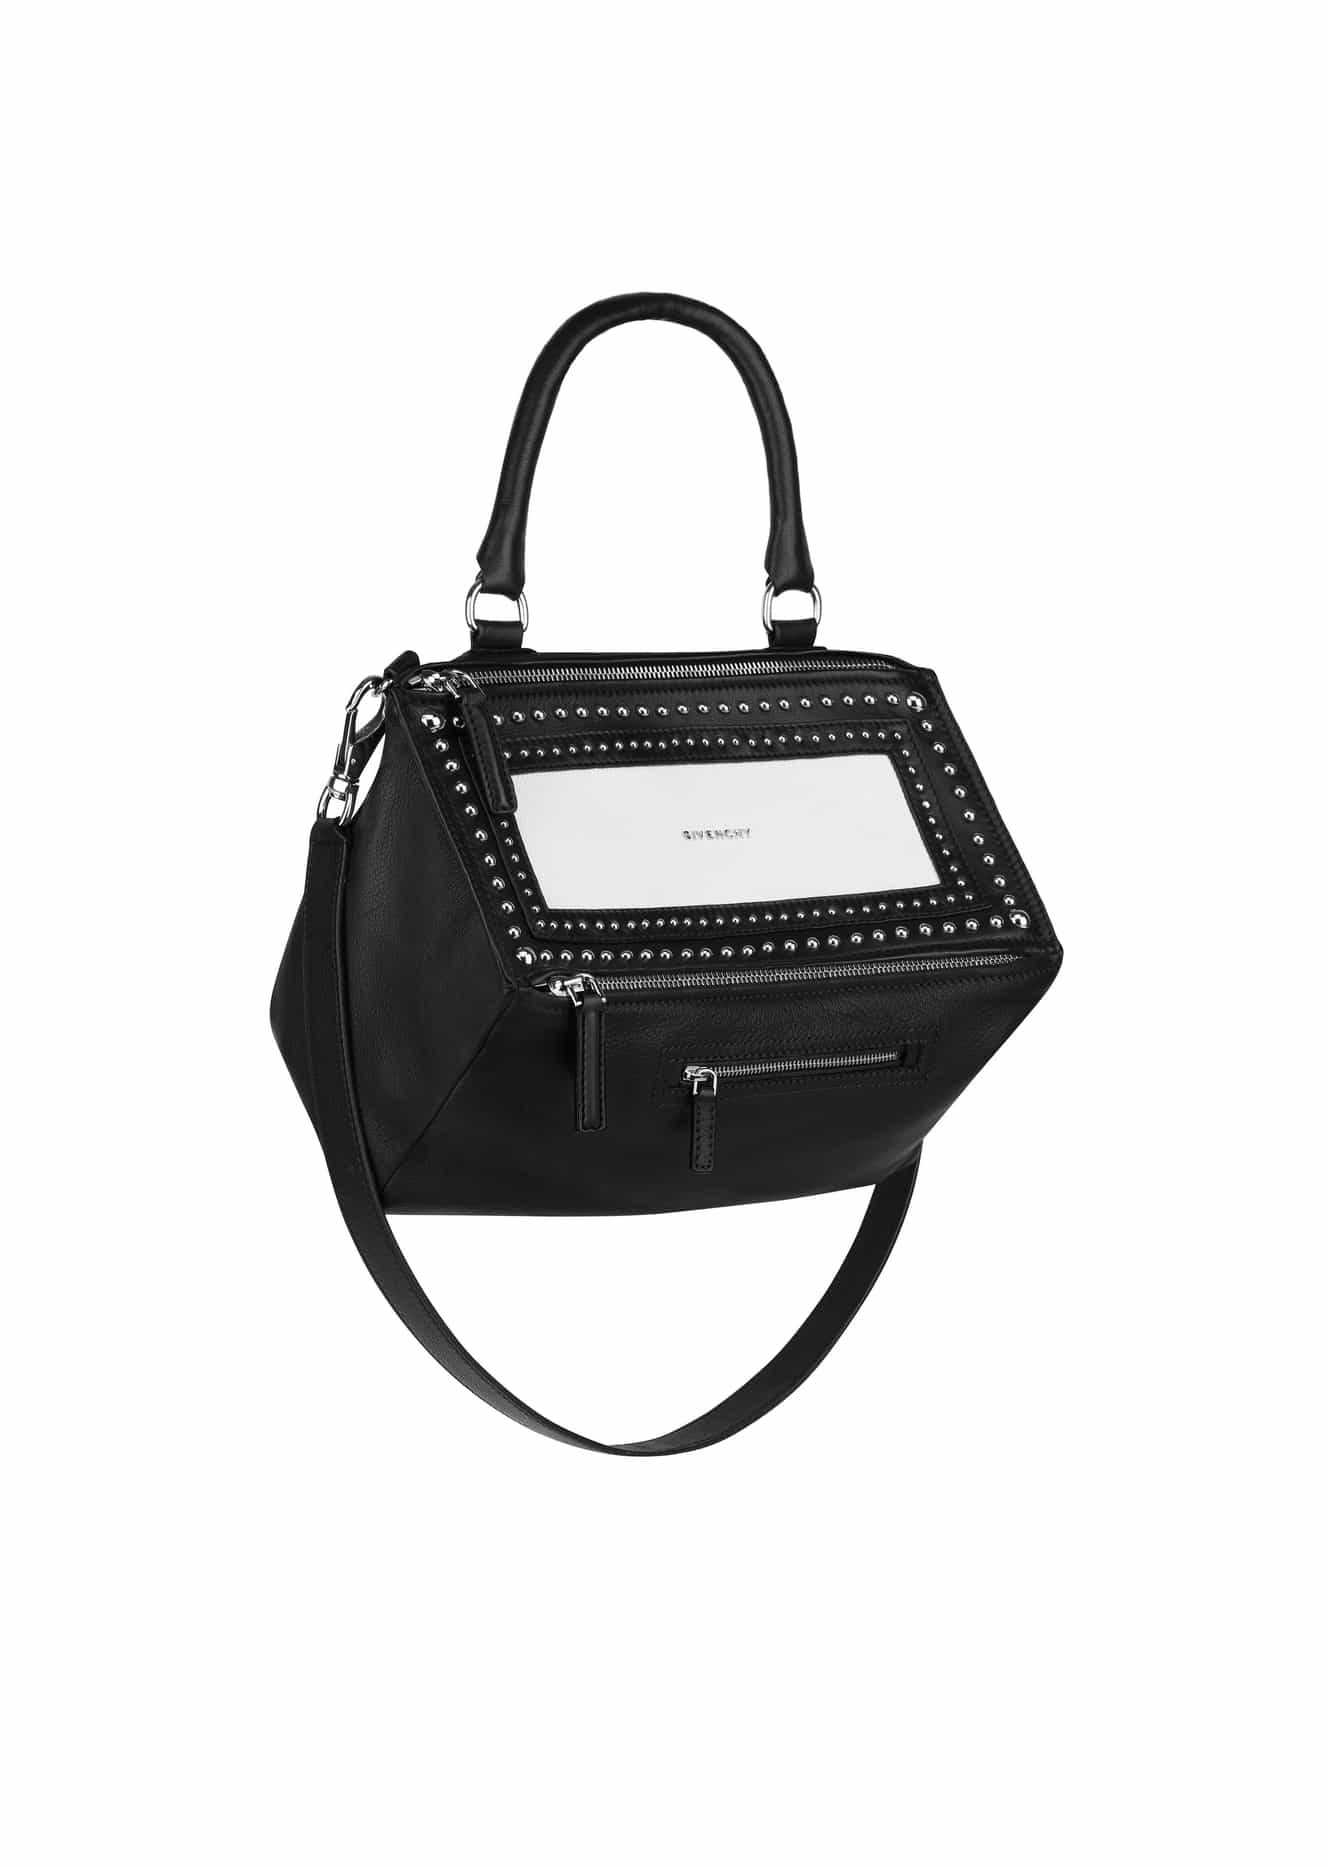 givenchy one handle bag